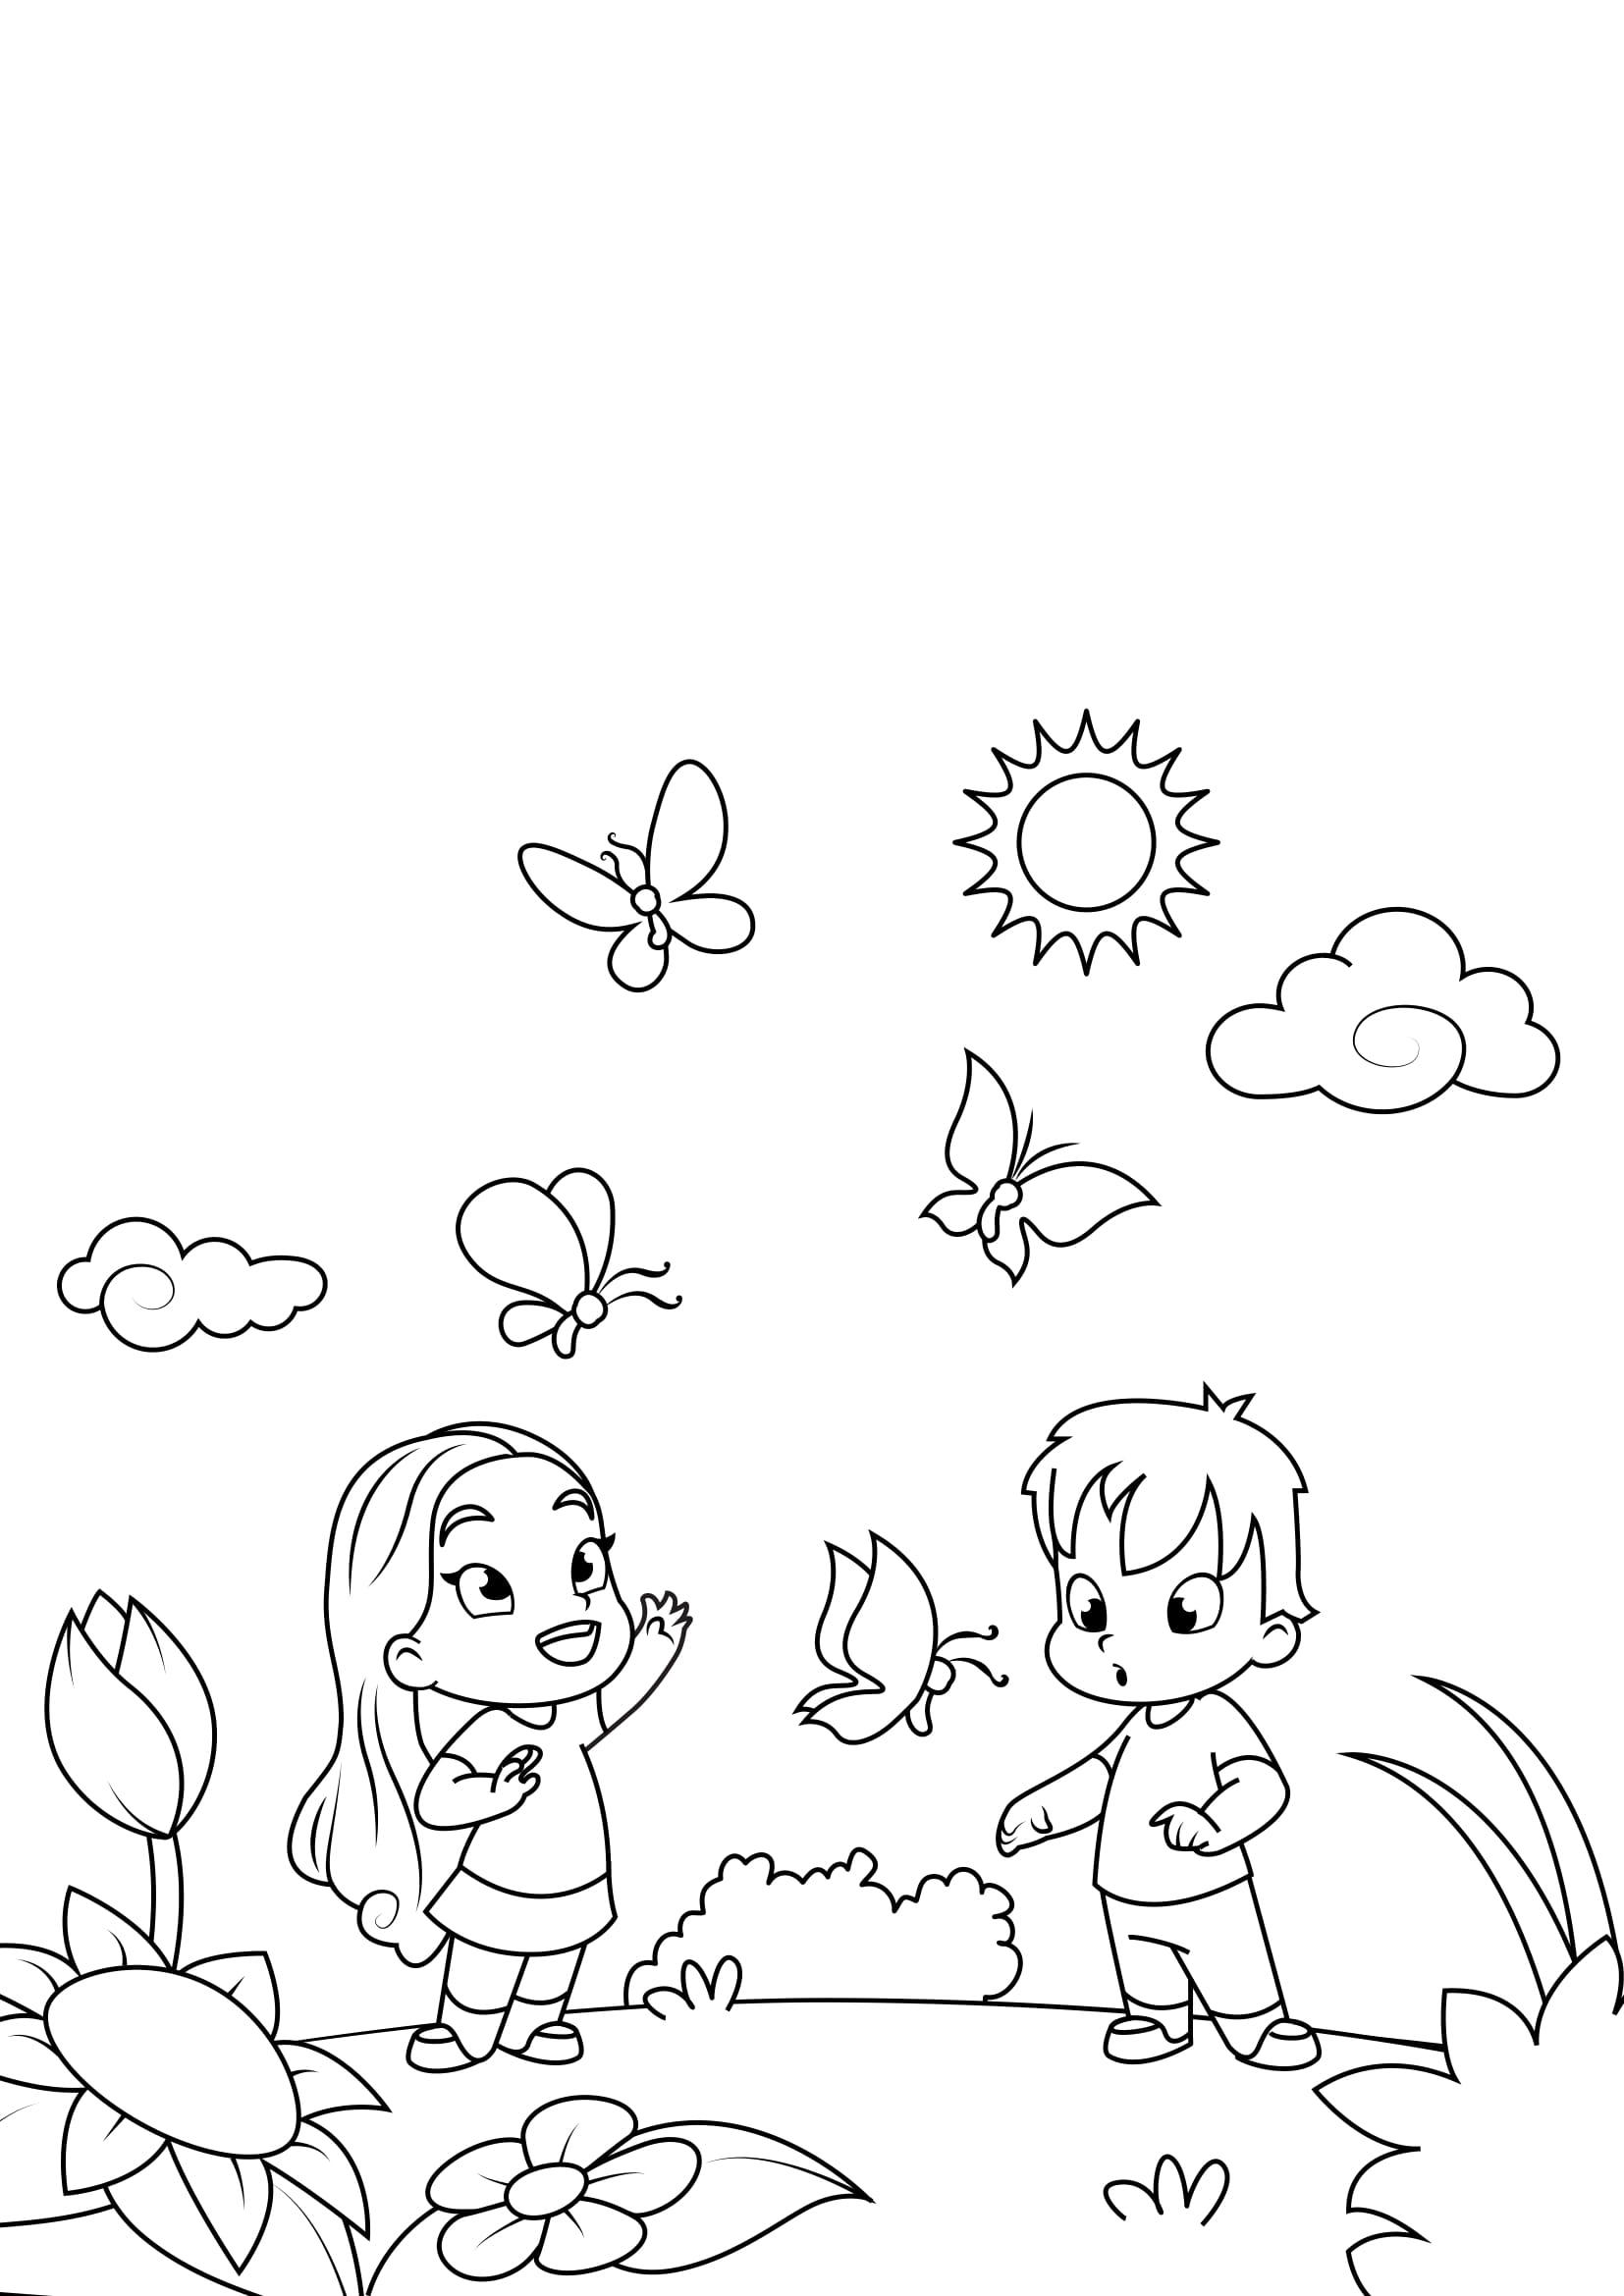 Coloring page spring, summer is coming